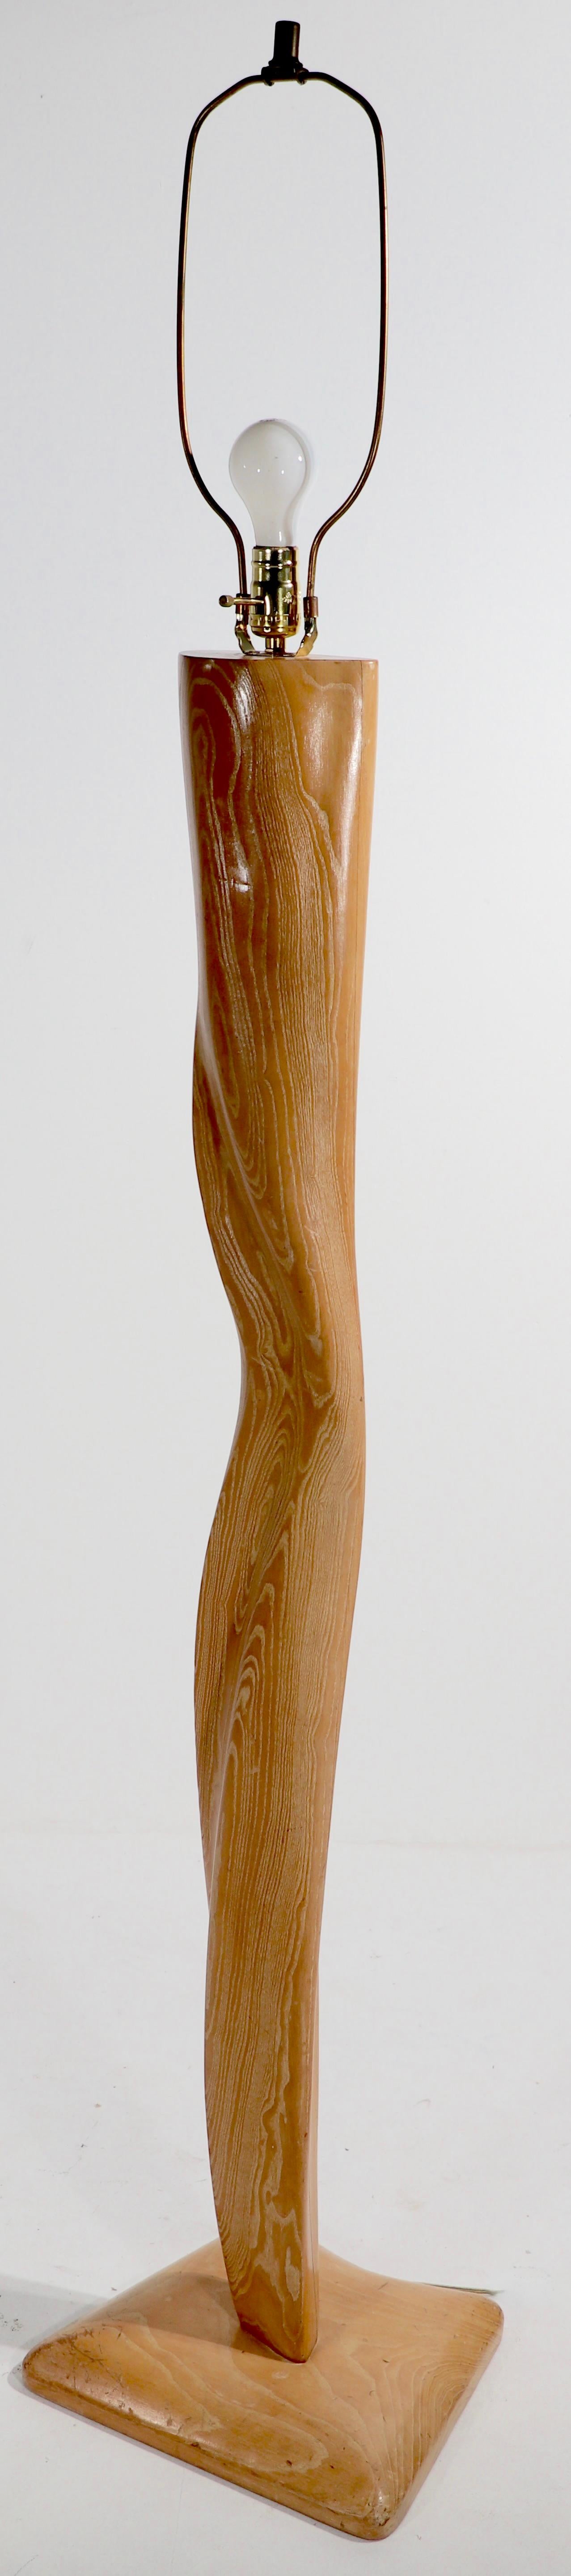 Sculptural organic wood floor lamp by Yashia Heifetz, in original cerused oak finish. This example has been rewired, the socket, and harp are not original. The lamp is in very good condition, showing only light cosmetic wear, normal and consistent